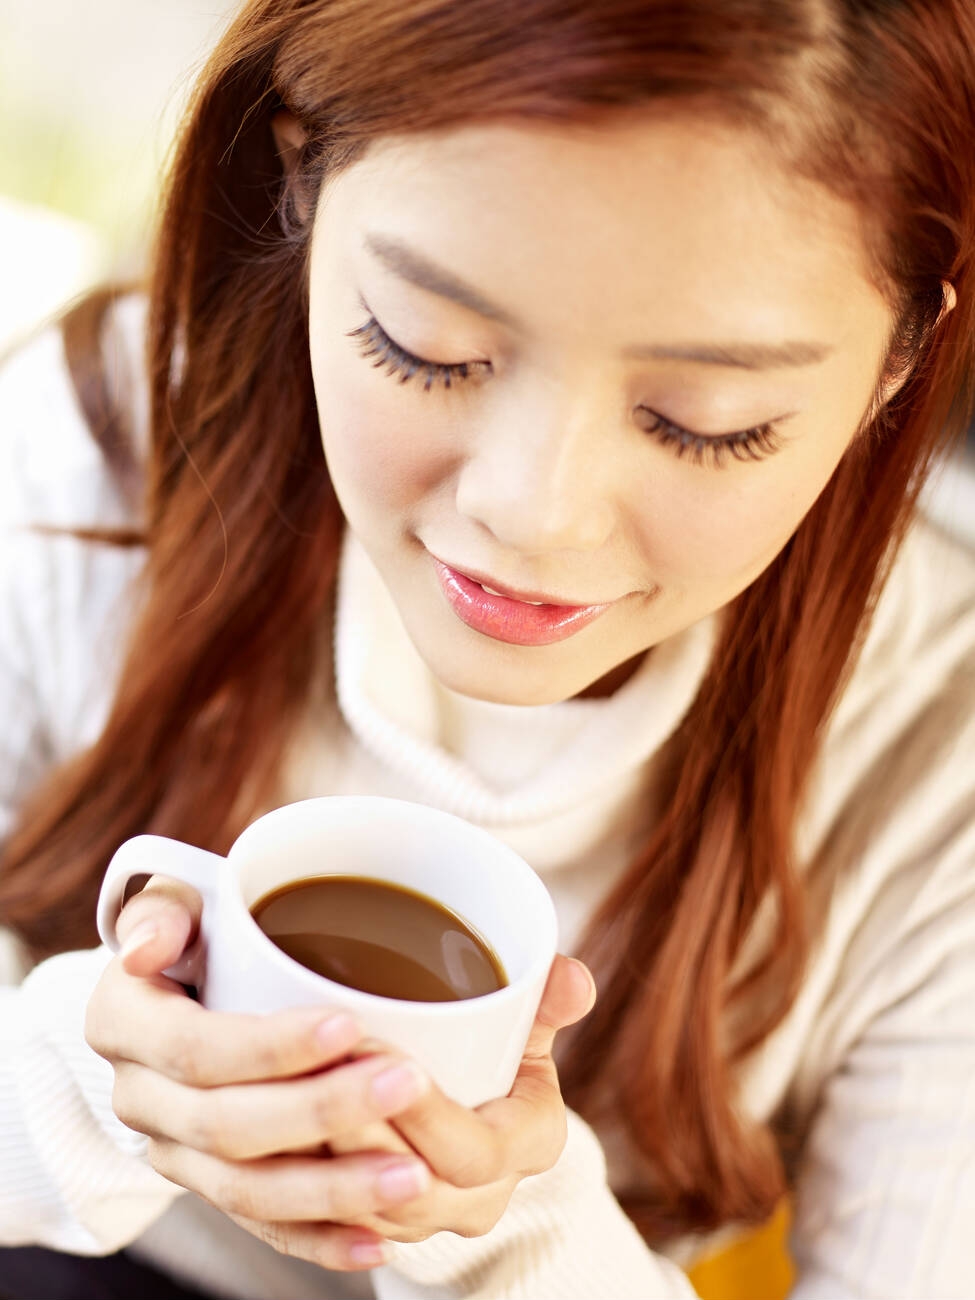 Is Coffee Good For Your Eyes? Here Are The Facts